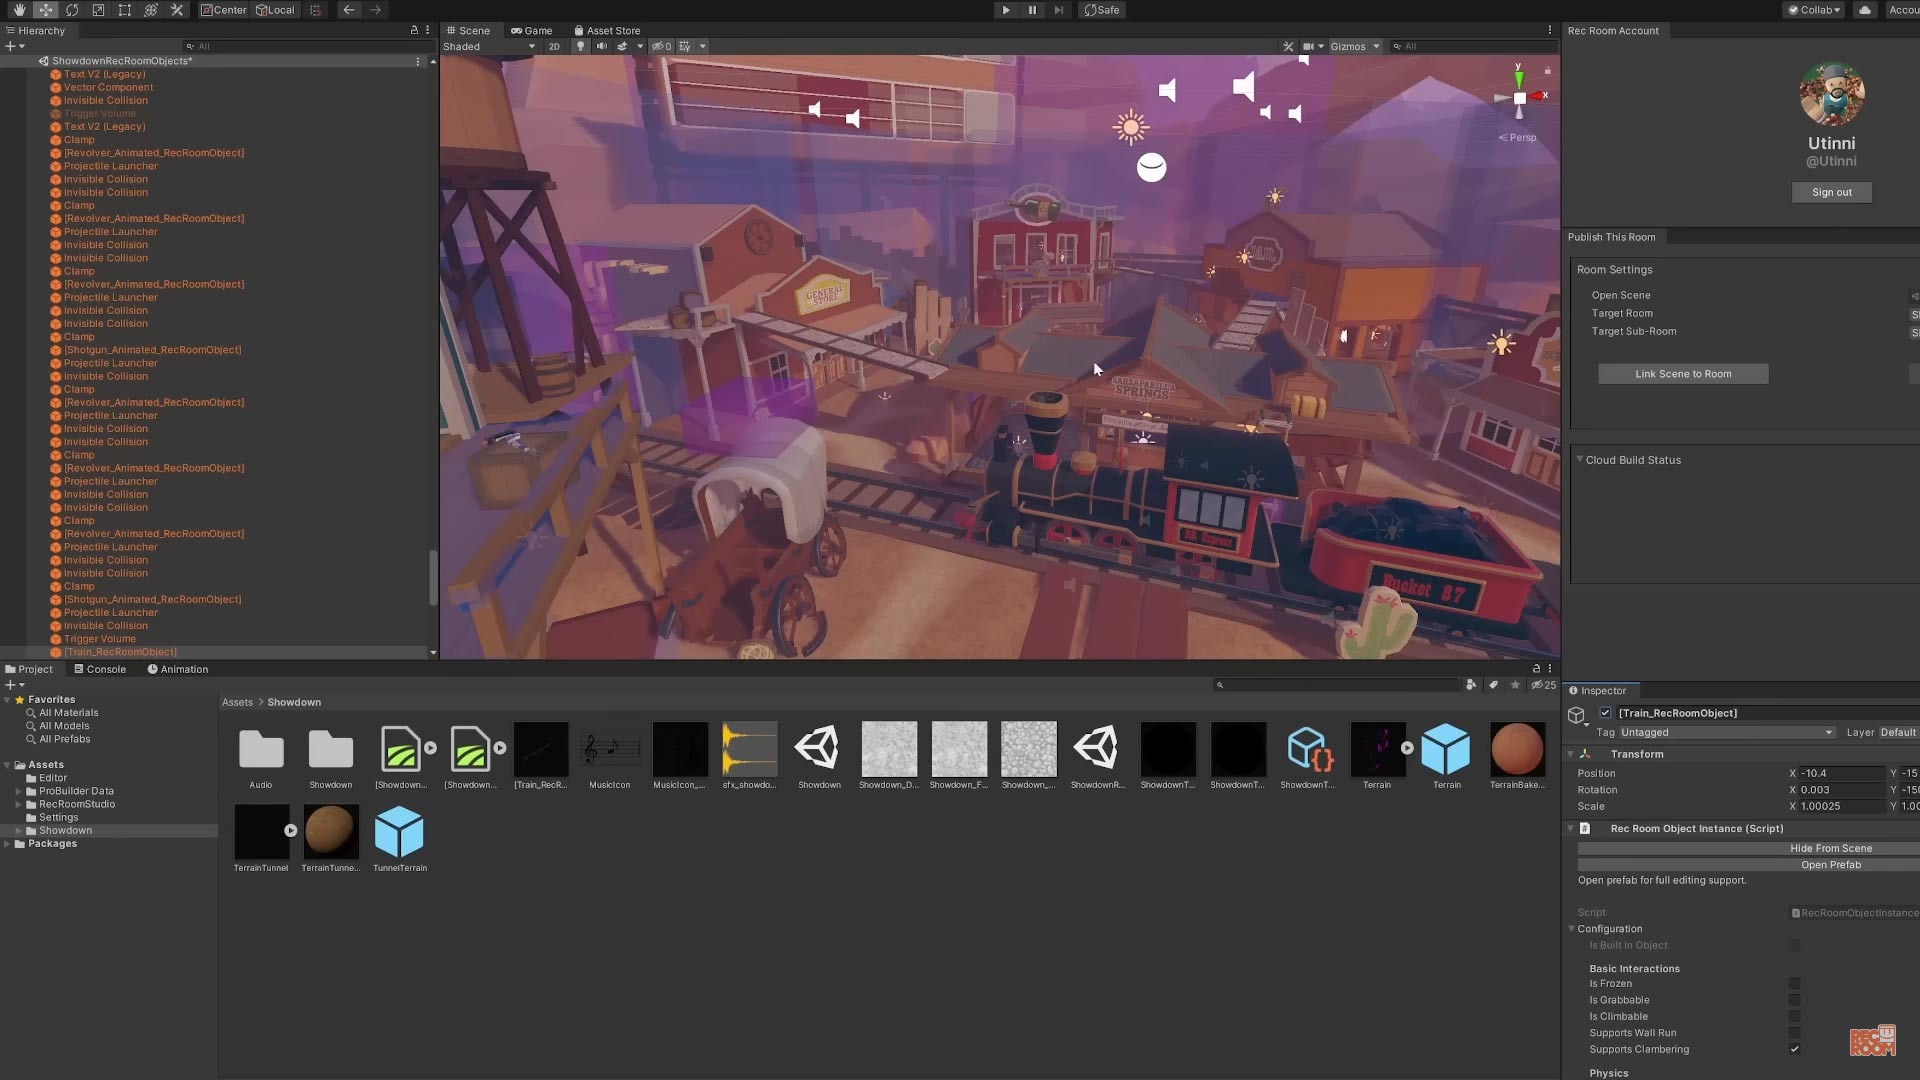 Rec Room’s New Unity-powered Creation Suite Brings Industry Standard Tools to Social VR Platform